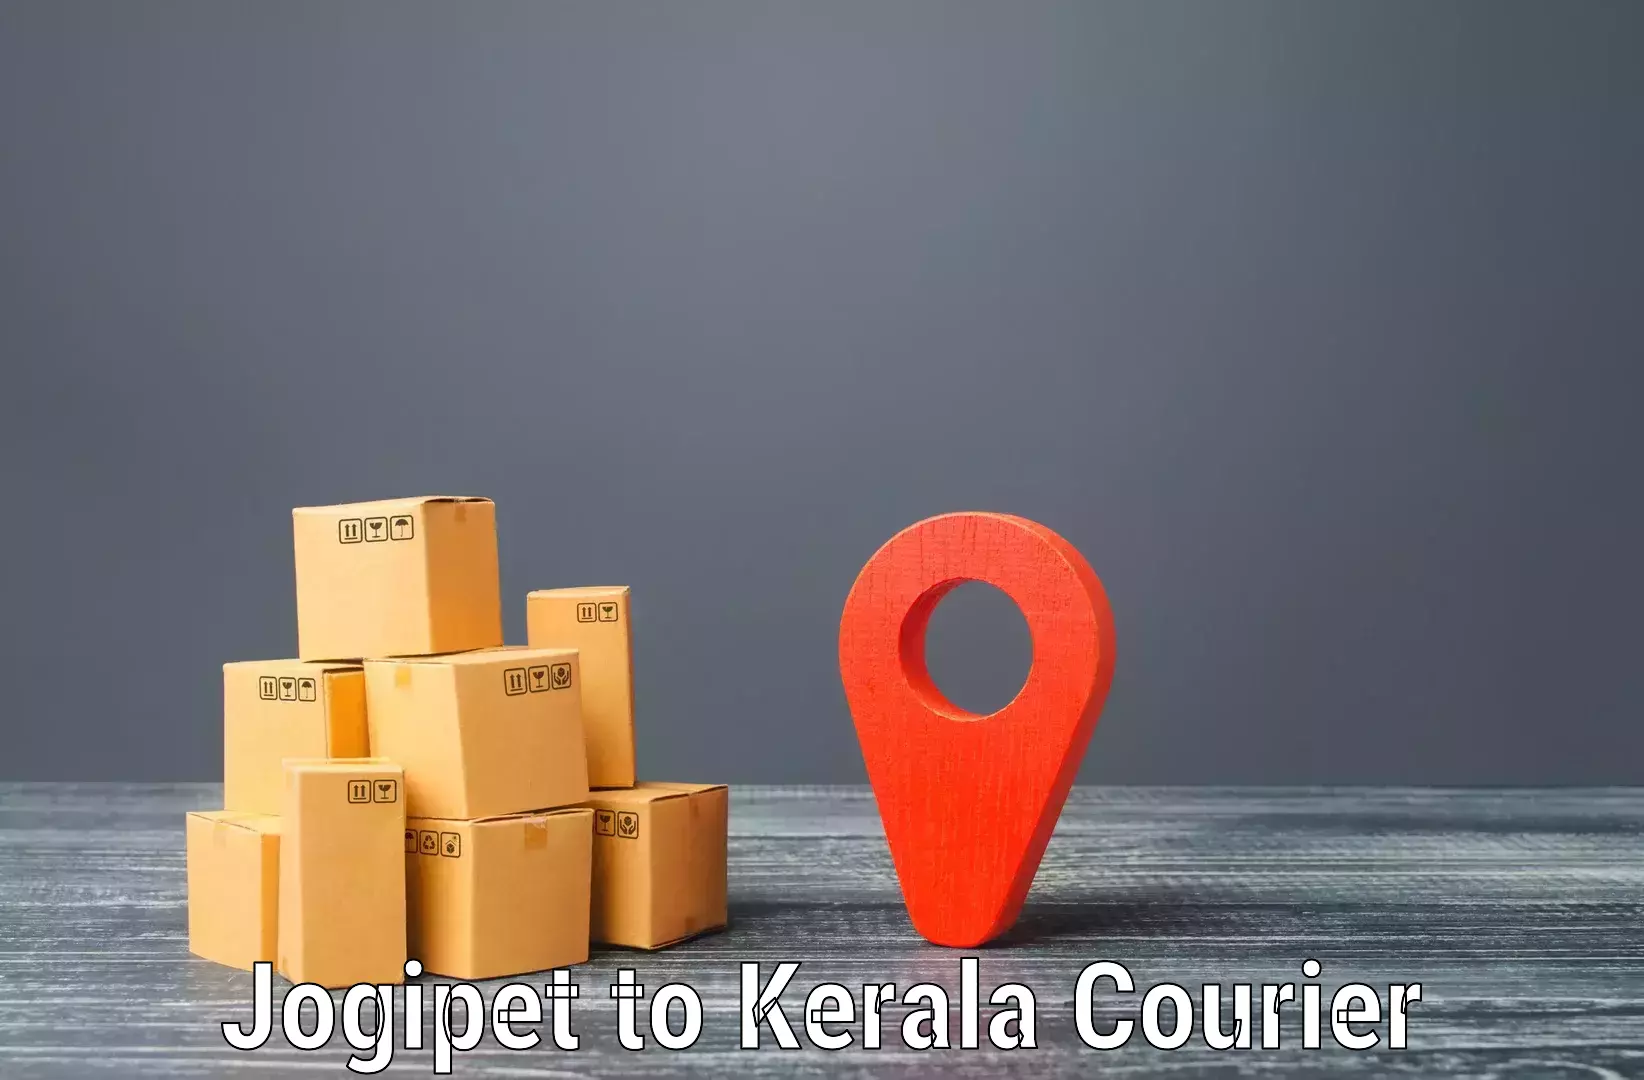 Multi-national courier services Jogipet to Kollam